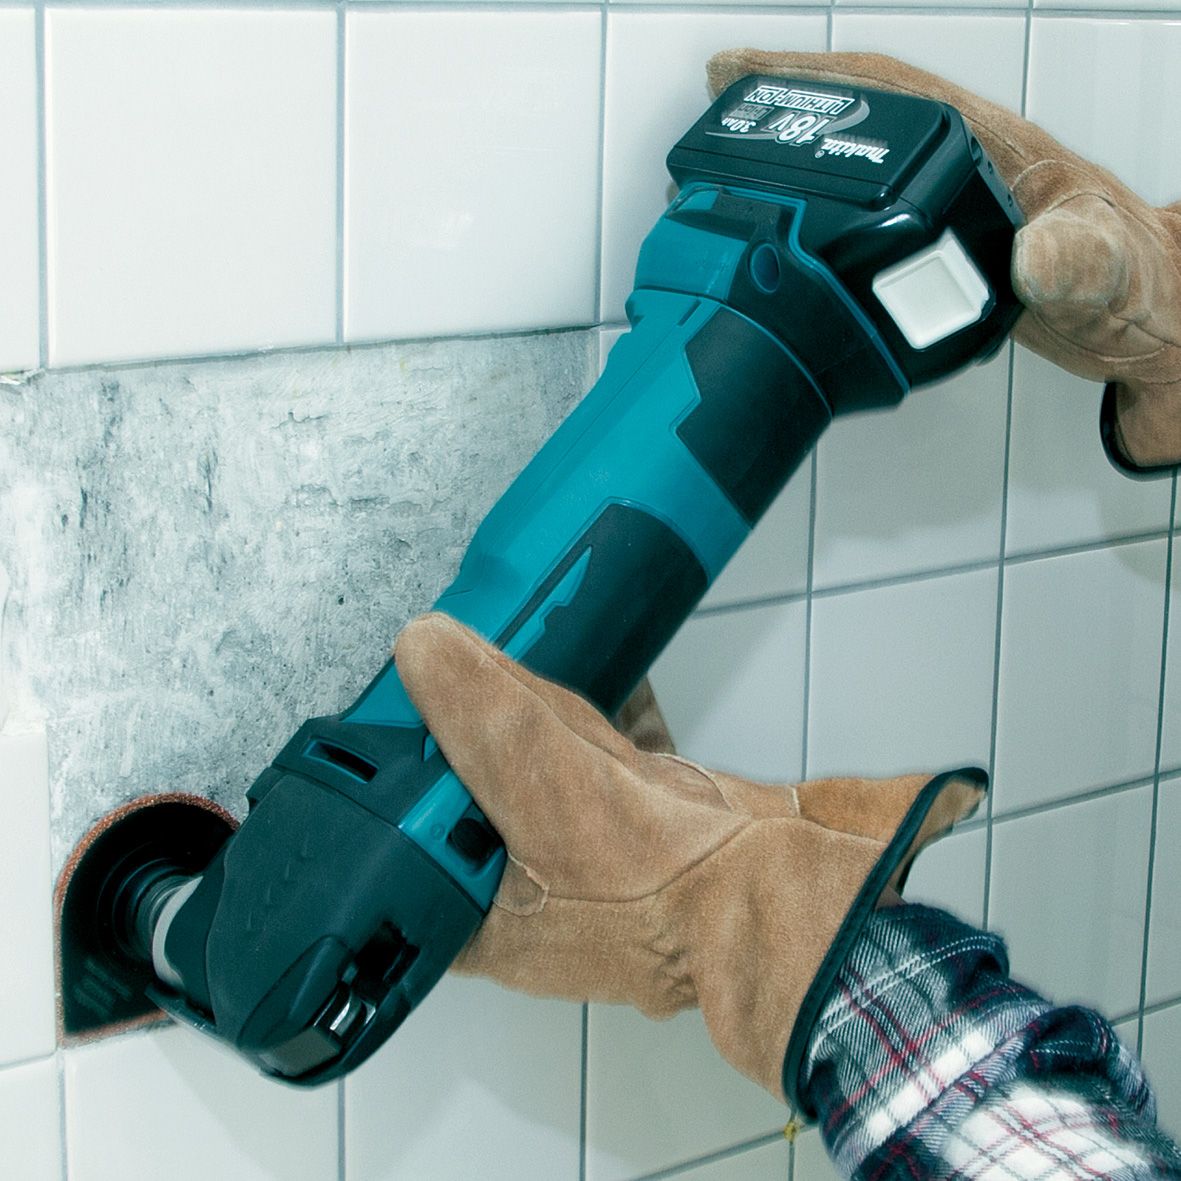 Makita 18v Ois Multi Tool Quick Change MAKDTM51Z1 | will cut plasterboard, wood, metal, ceramic tiles and can flush cut nails and metal pipework. | toolforce.ie